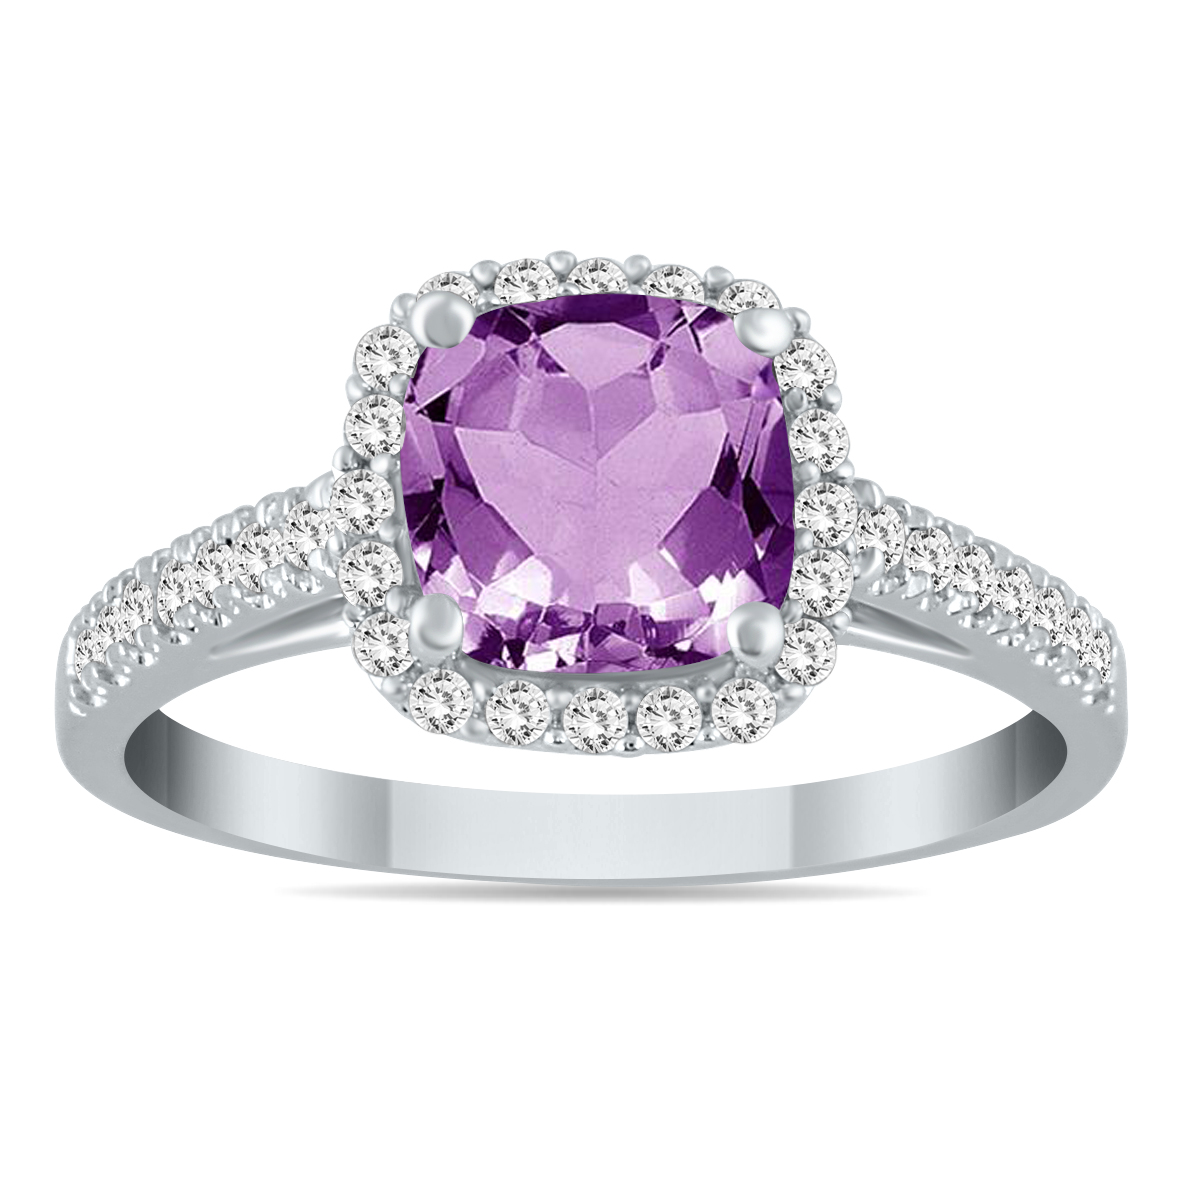 5MM Cushion Cut Amethyst and Diamond Halo Ring in 10K White Gold